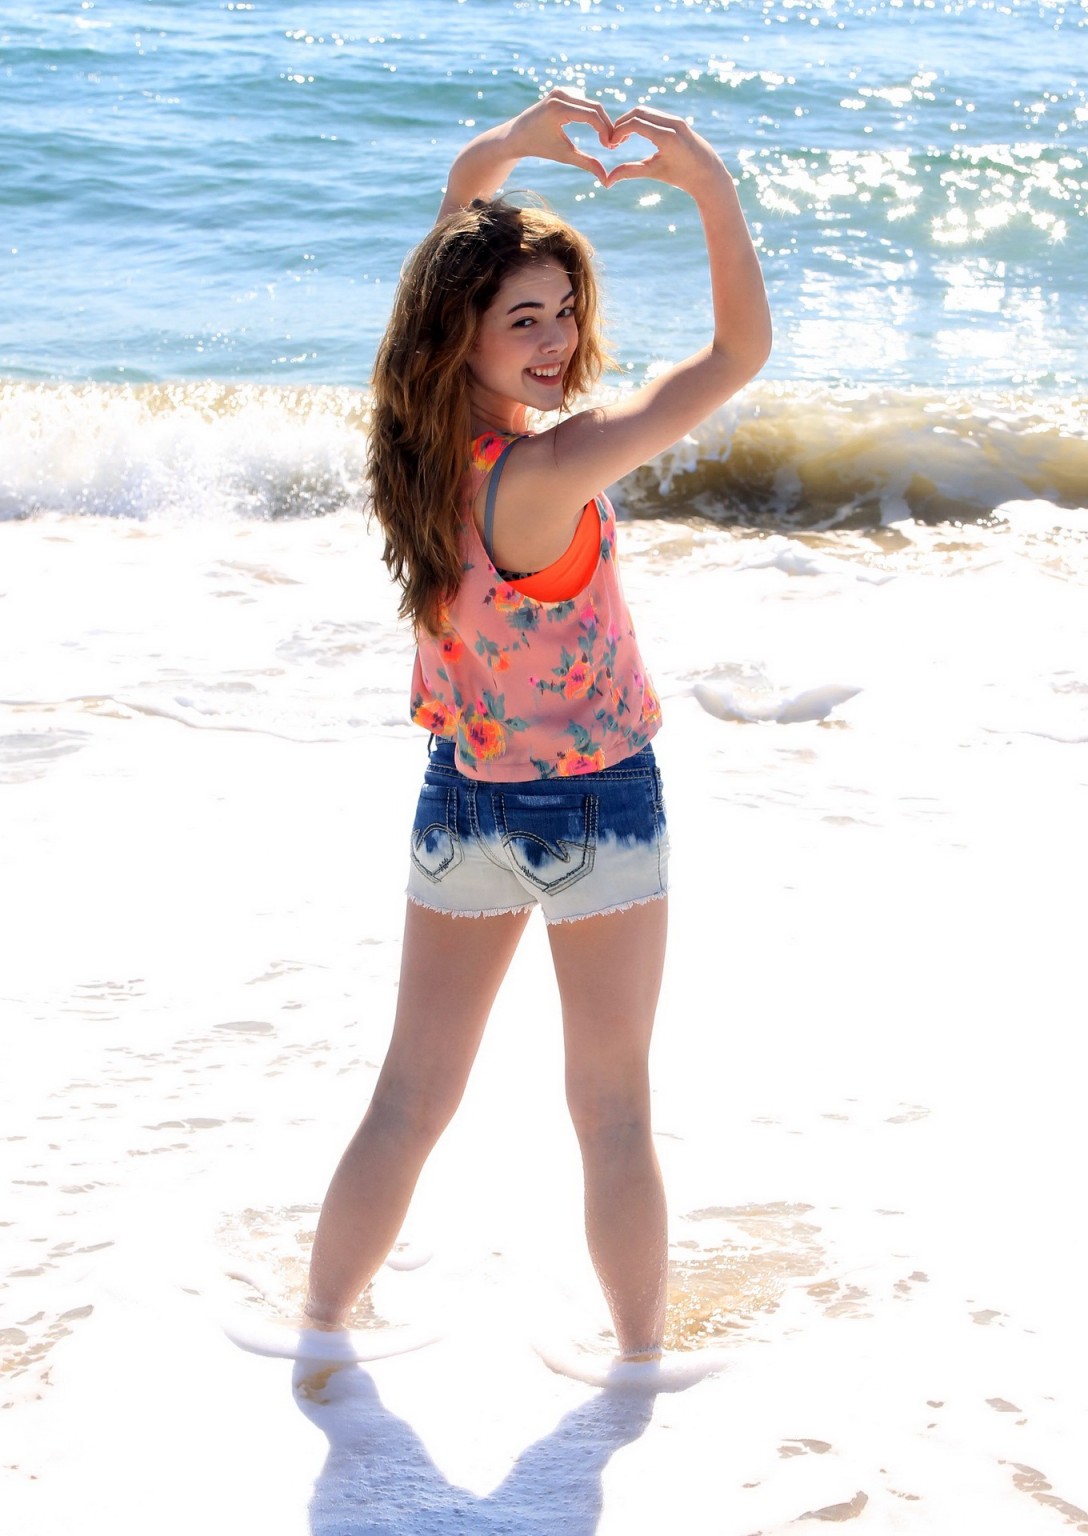 McKaley Miller wearing skimpy top and denim shorts at the beach in Los Angeles #75194340